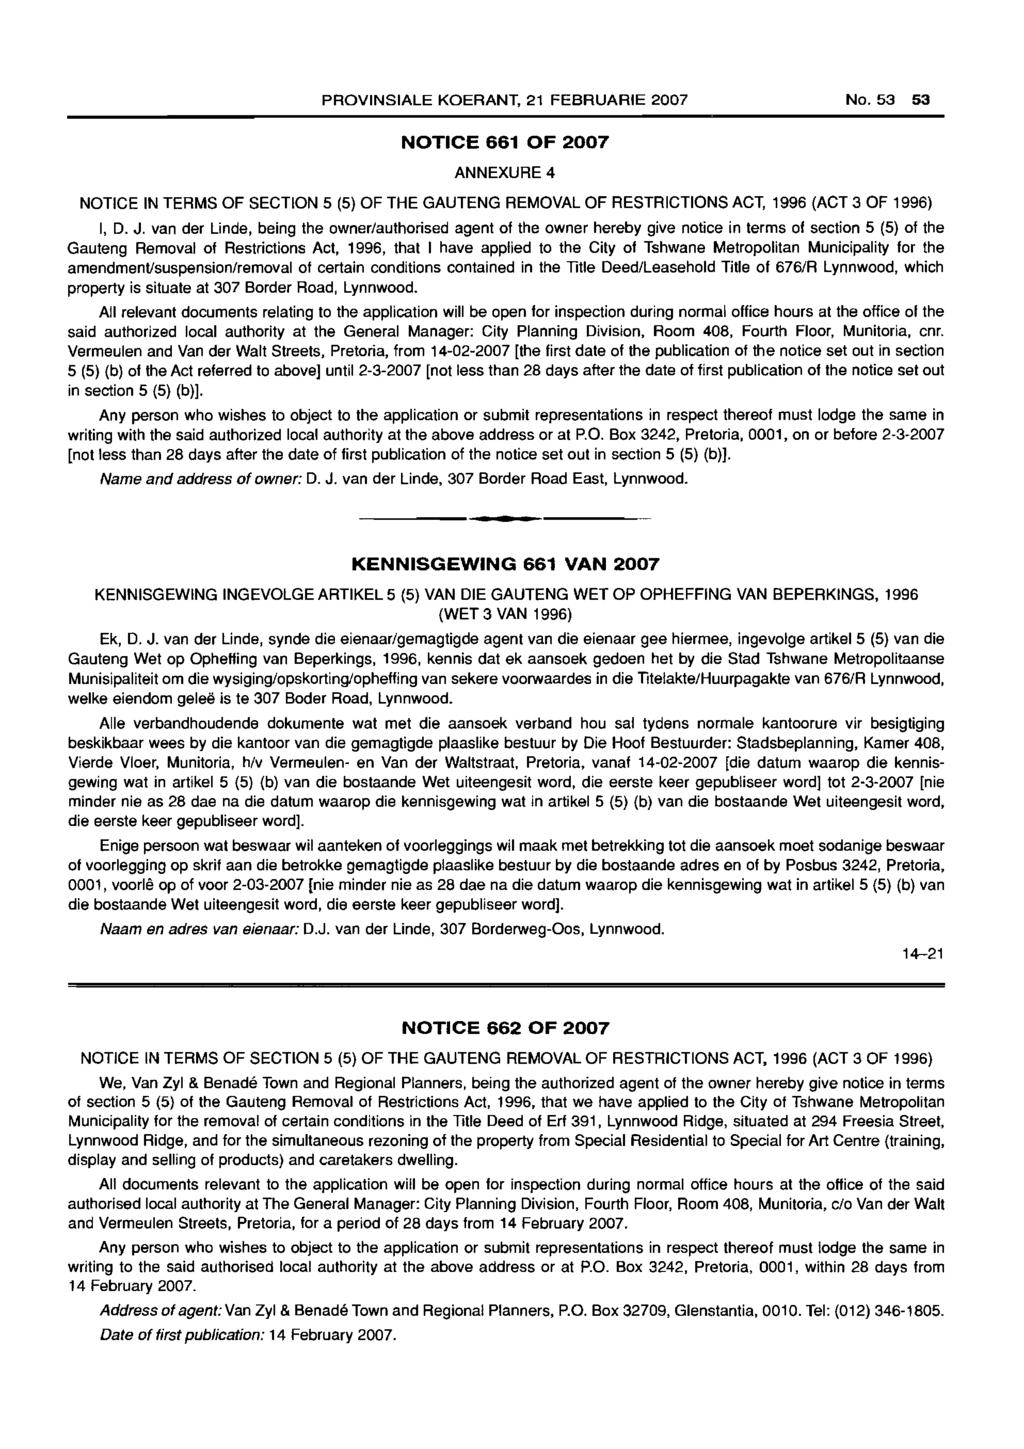 PROVINSIALE KOERANT, 21 FEBRUARIE 2007 NO.53 53 NOTICE 661 OF 2007 ANNEXURE 4 NOTICE IN TERMS OF SECTION 5 (5) OF THE GAUTENG REMOVAL OF RESTRICTIONS ACT, 1996 (ACT 3 OF 1996) I, D. J.